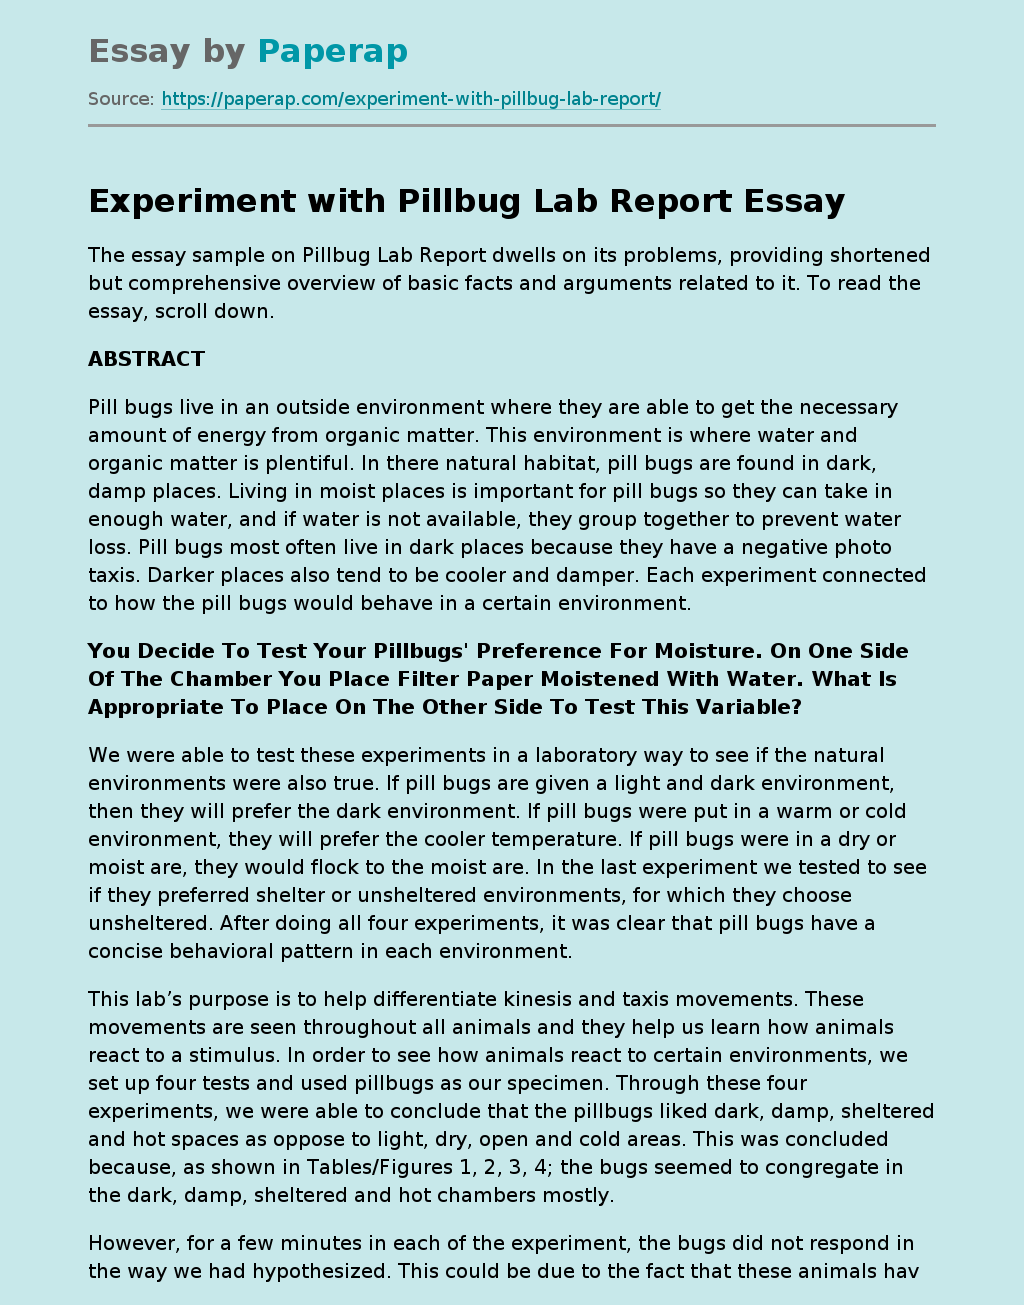 Experiment with Pillbug Lab Report